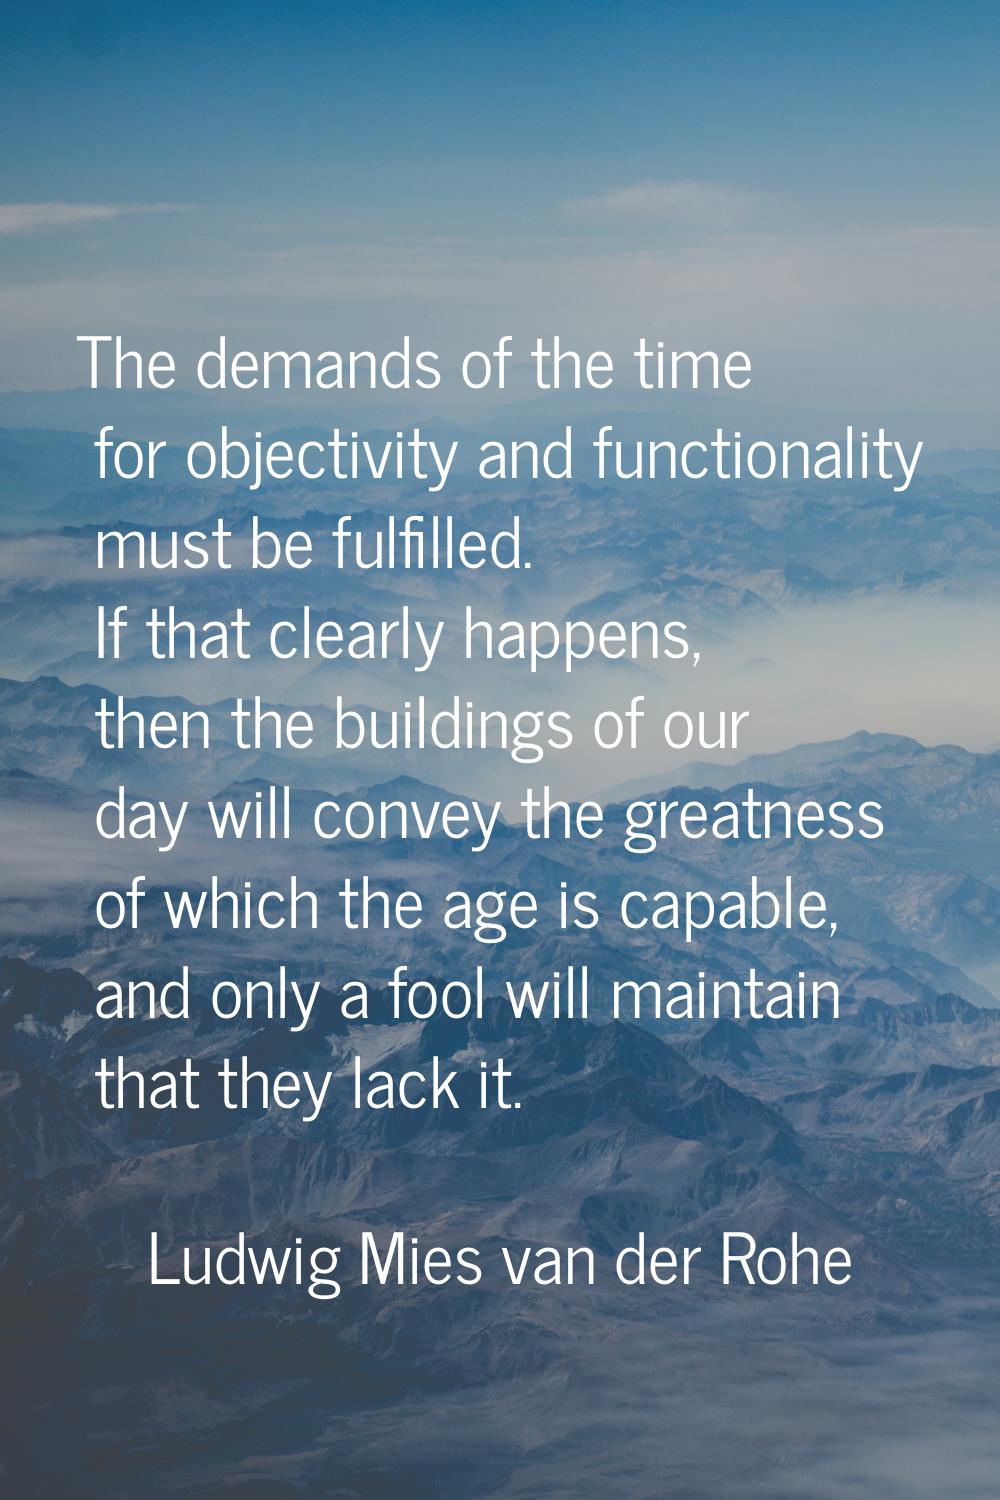 The demands of the time for objectivity and functionality must be fulfilled. If that clearly happen